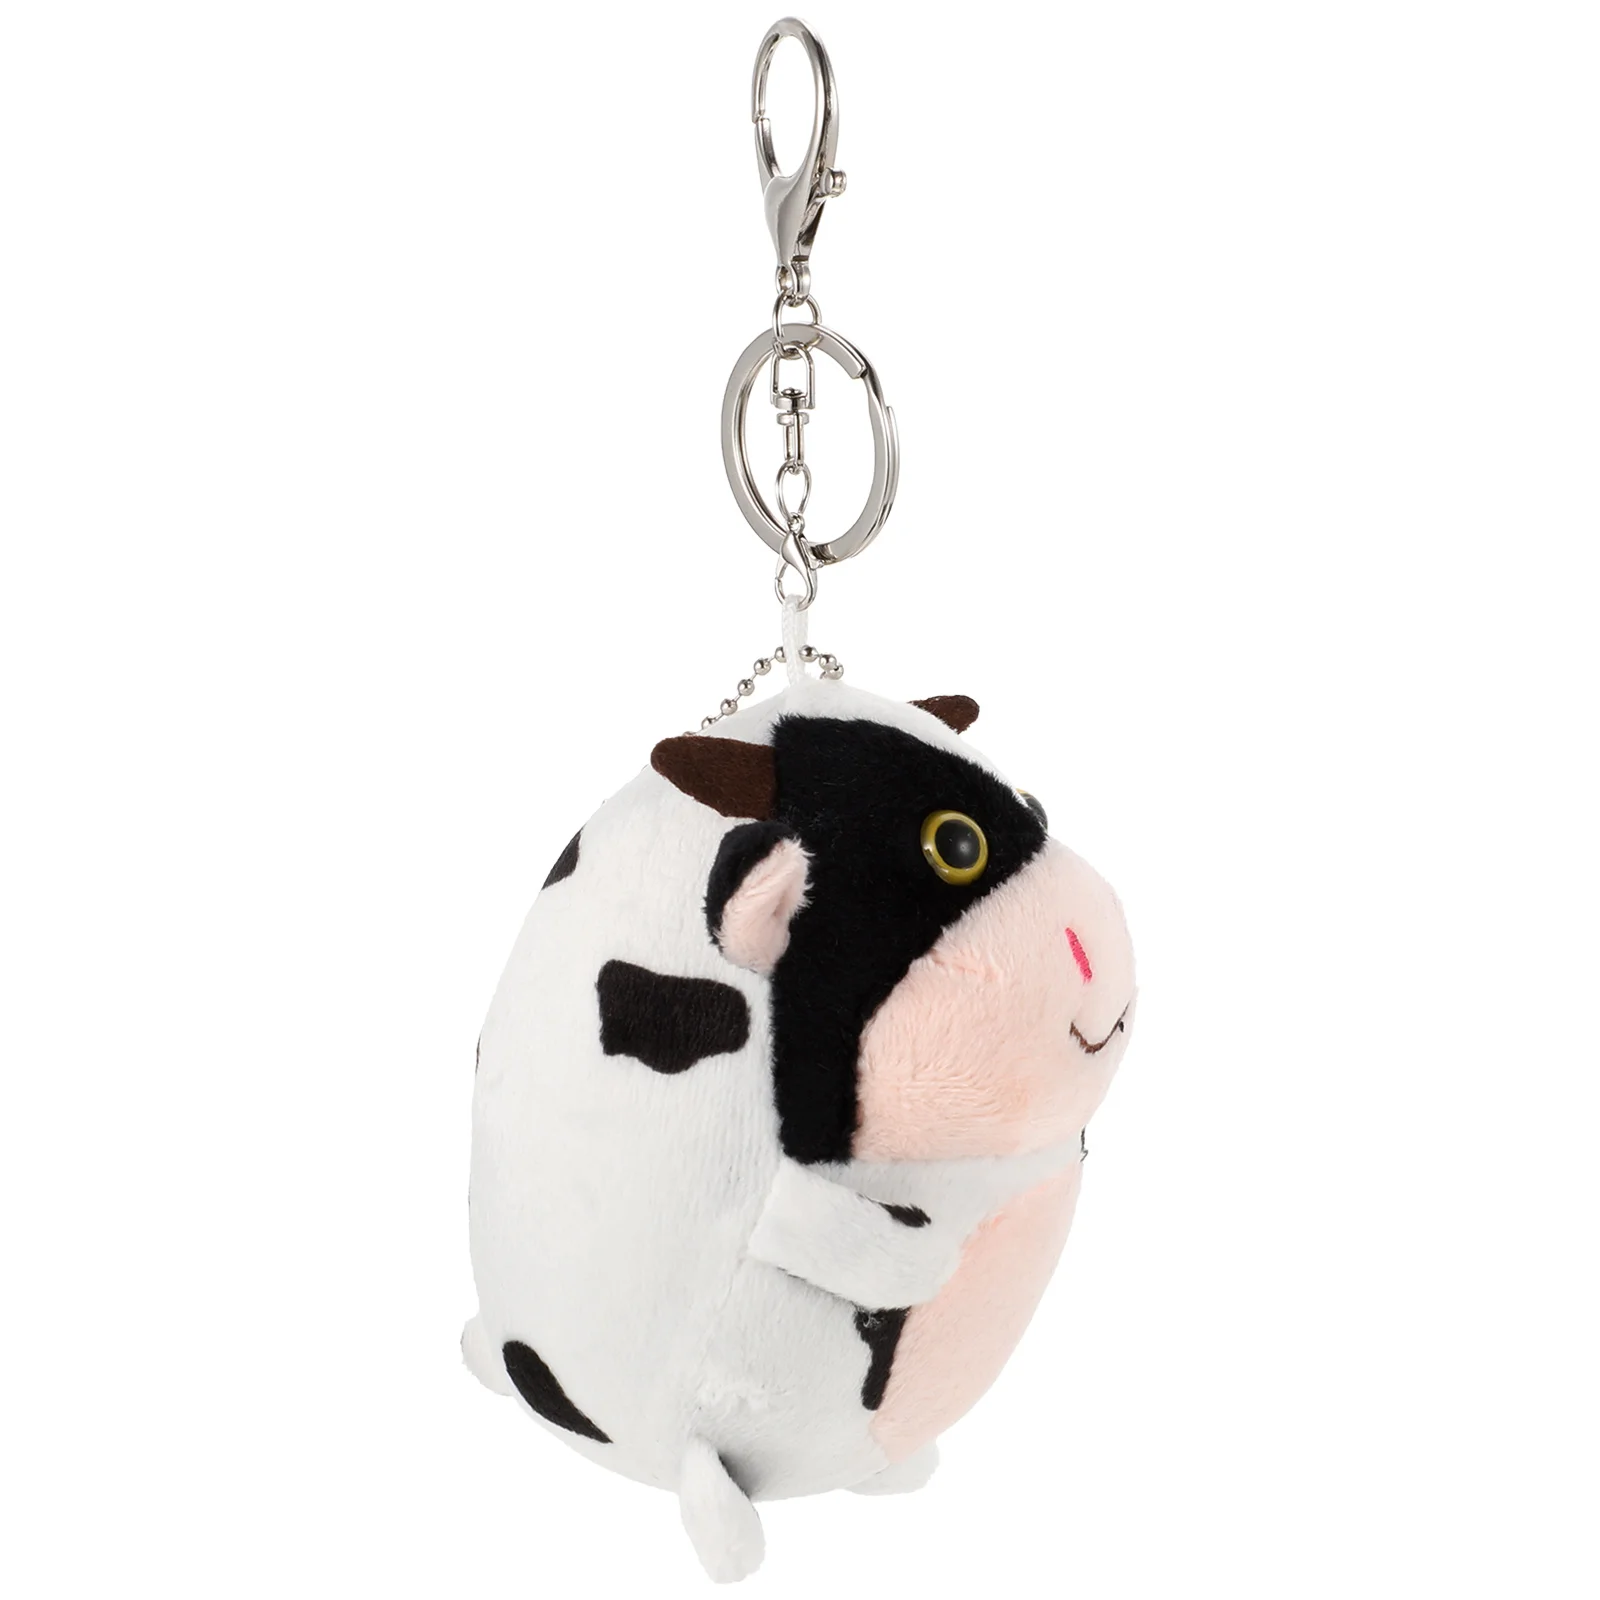 

Plush Cow Keychain Backpack Hanging Key Pendant Cartoon Cow Keyring for Kids